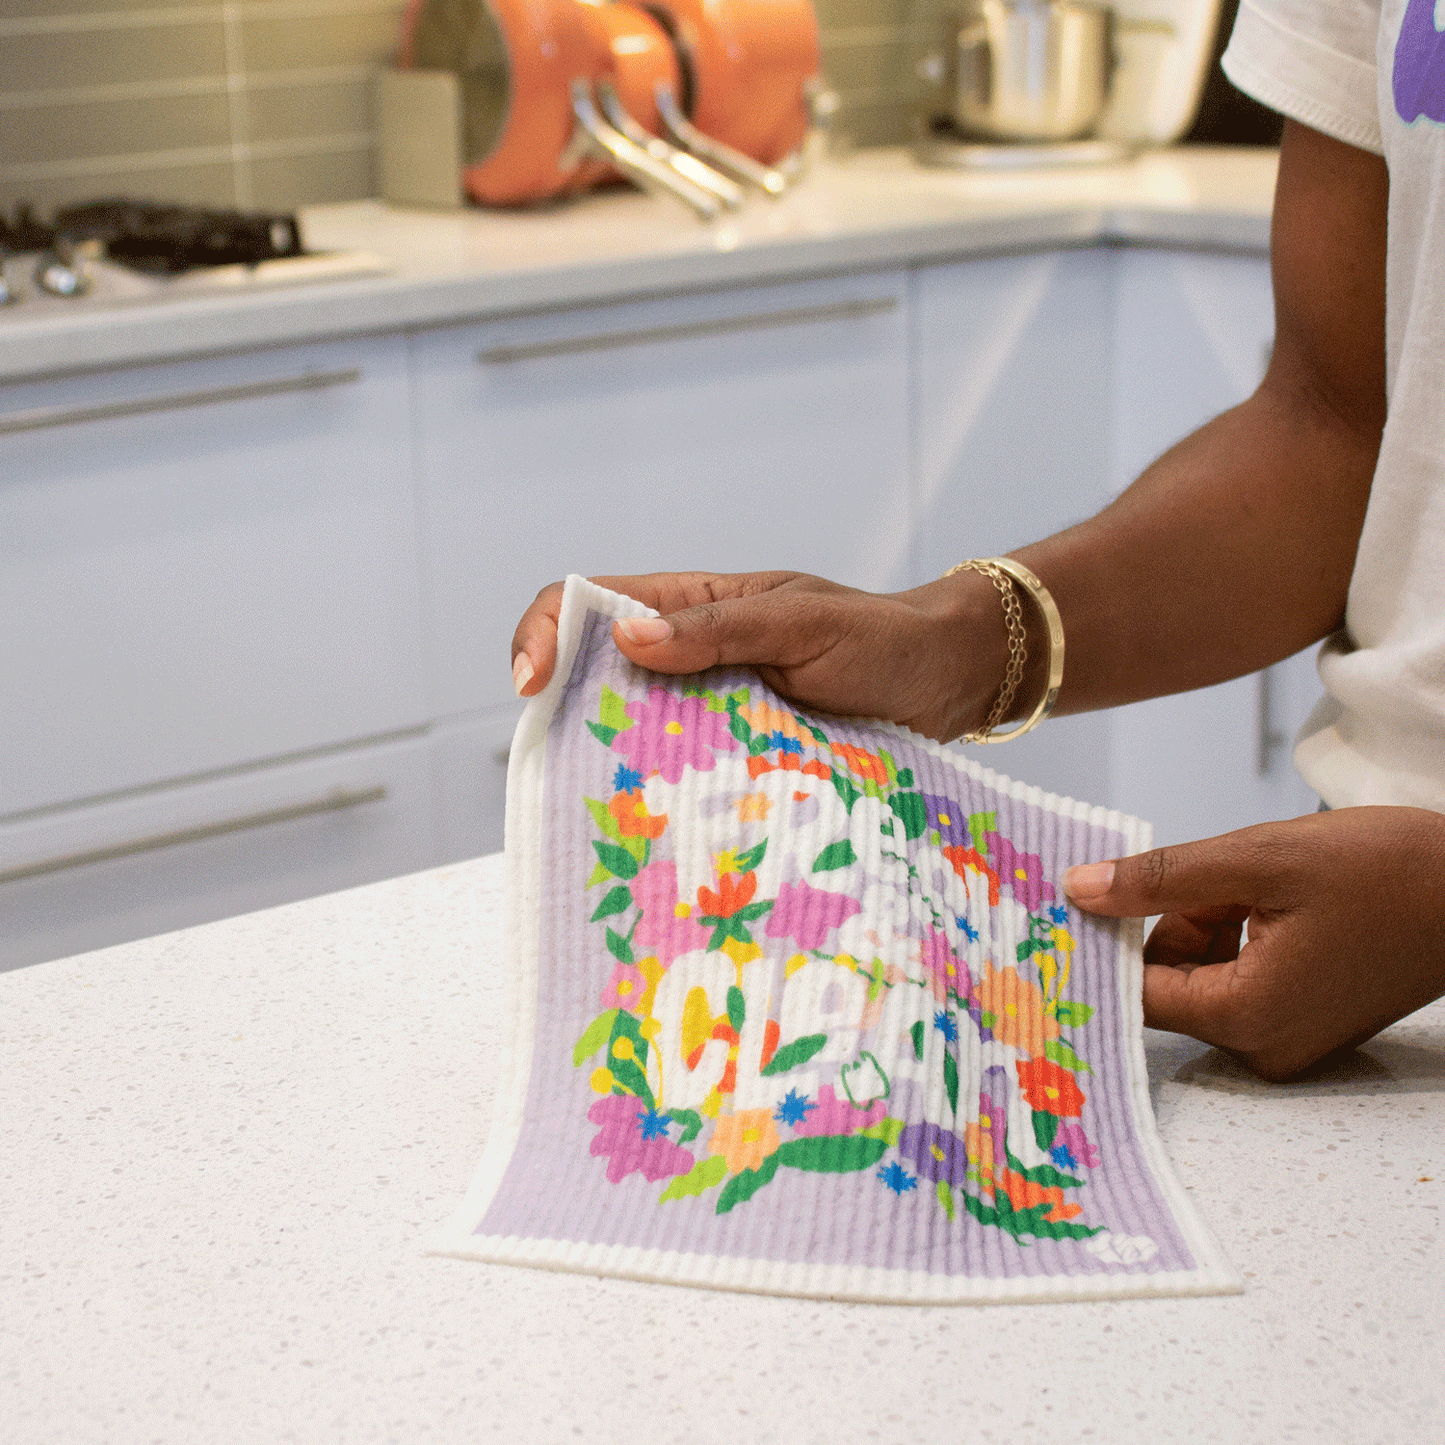 Hands hold sponge cloth in a white cabinet modern kitchen. Sponge cloth says “Fresh & Clean” surrounded by colorful abstract flowers. Sponge cloth is wet and is now soft and draping (no longer dry and flat).